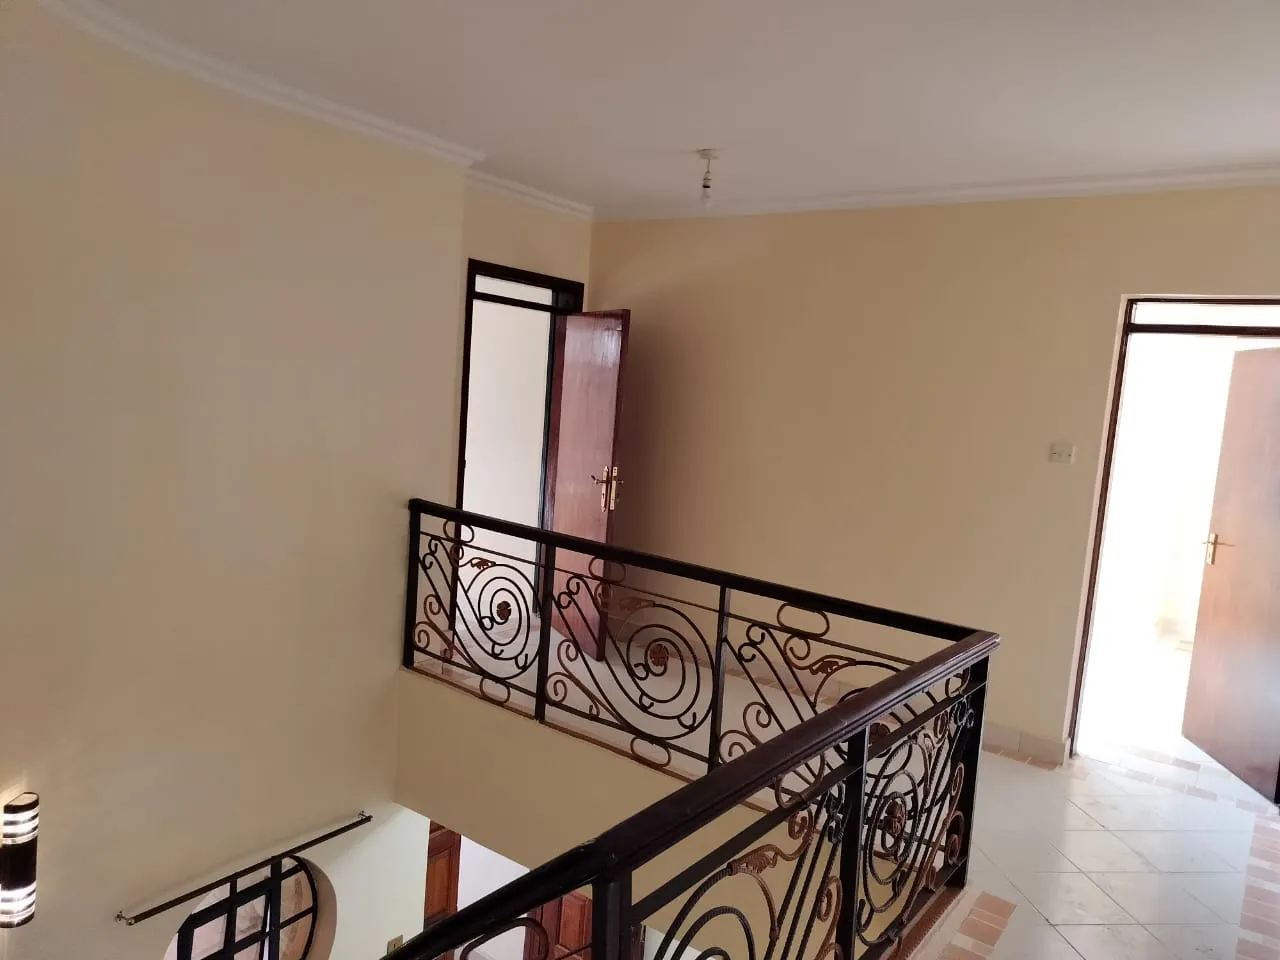 7 bedroom all ensuite Mansion for sale in Acacia kitengela with SQ gym CCTV Garden etc House 7 bedrooms